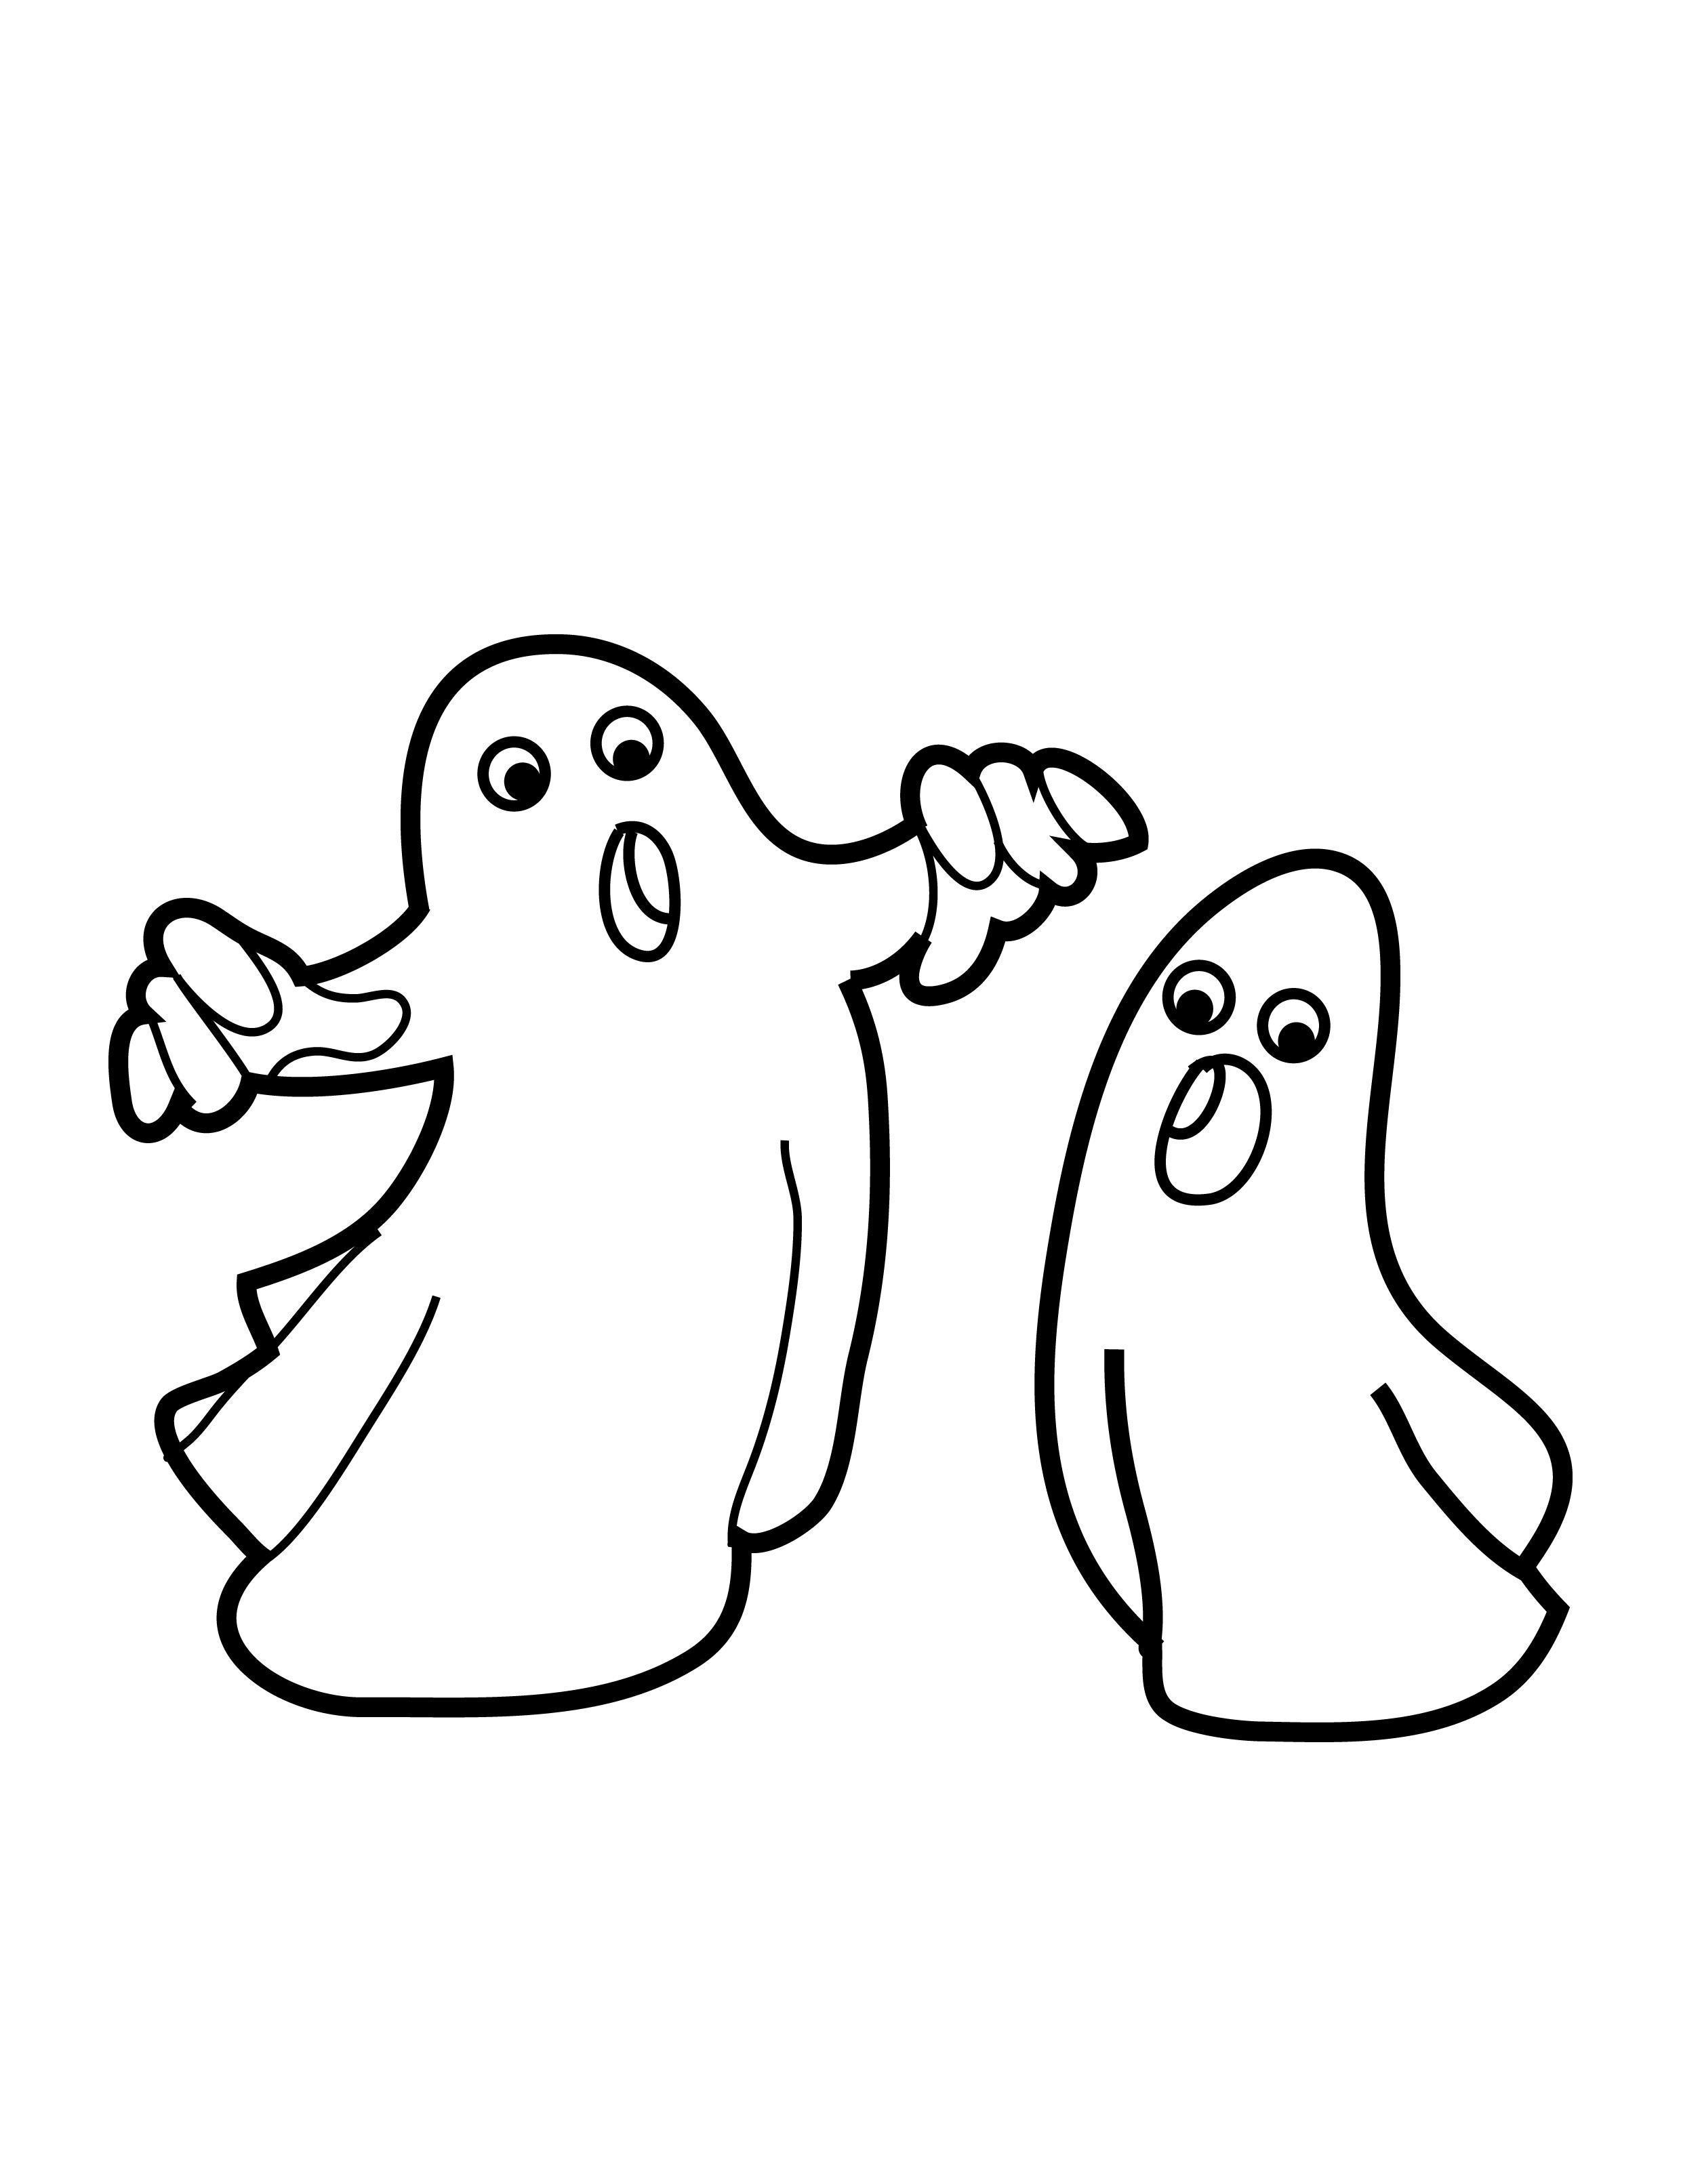 ghost-coloring-page-0116-q1